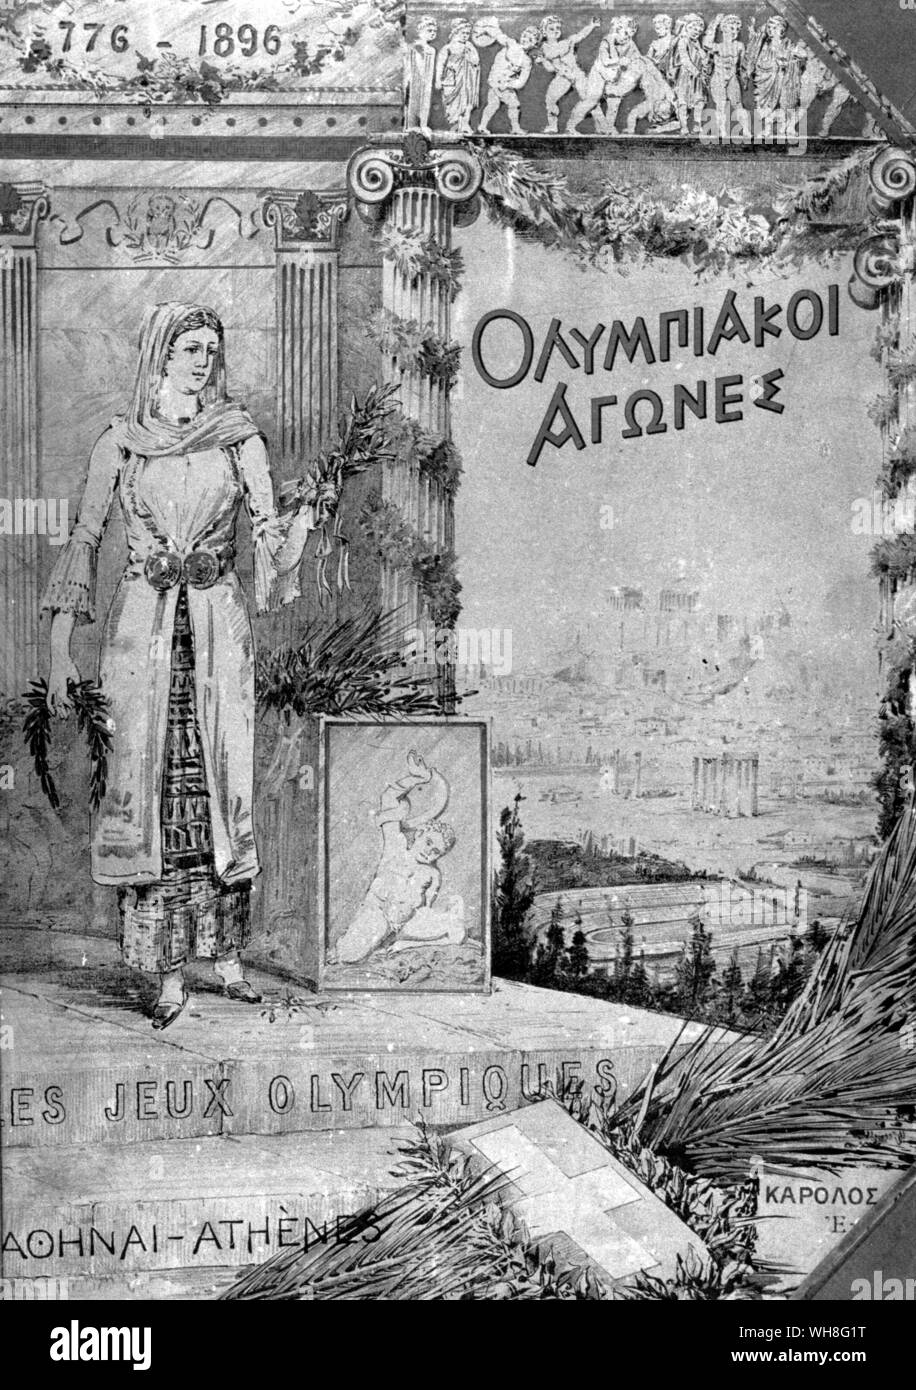 Les Jeux Olympiques (Olympic Games) program cover for the 1896 Olympic Games, Athens. The Olympic Games page 25. Stock Photo